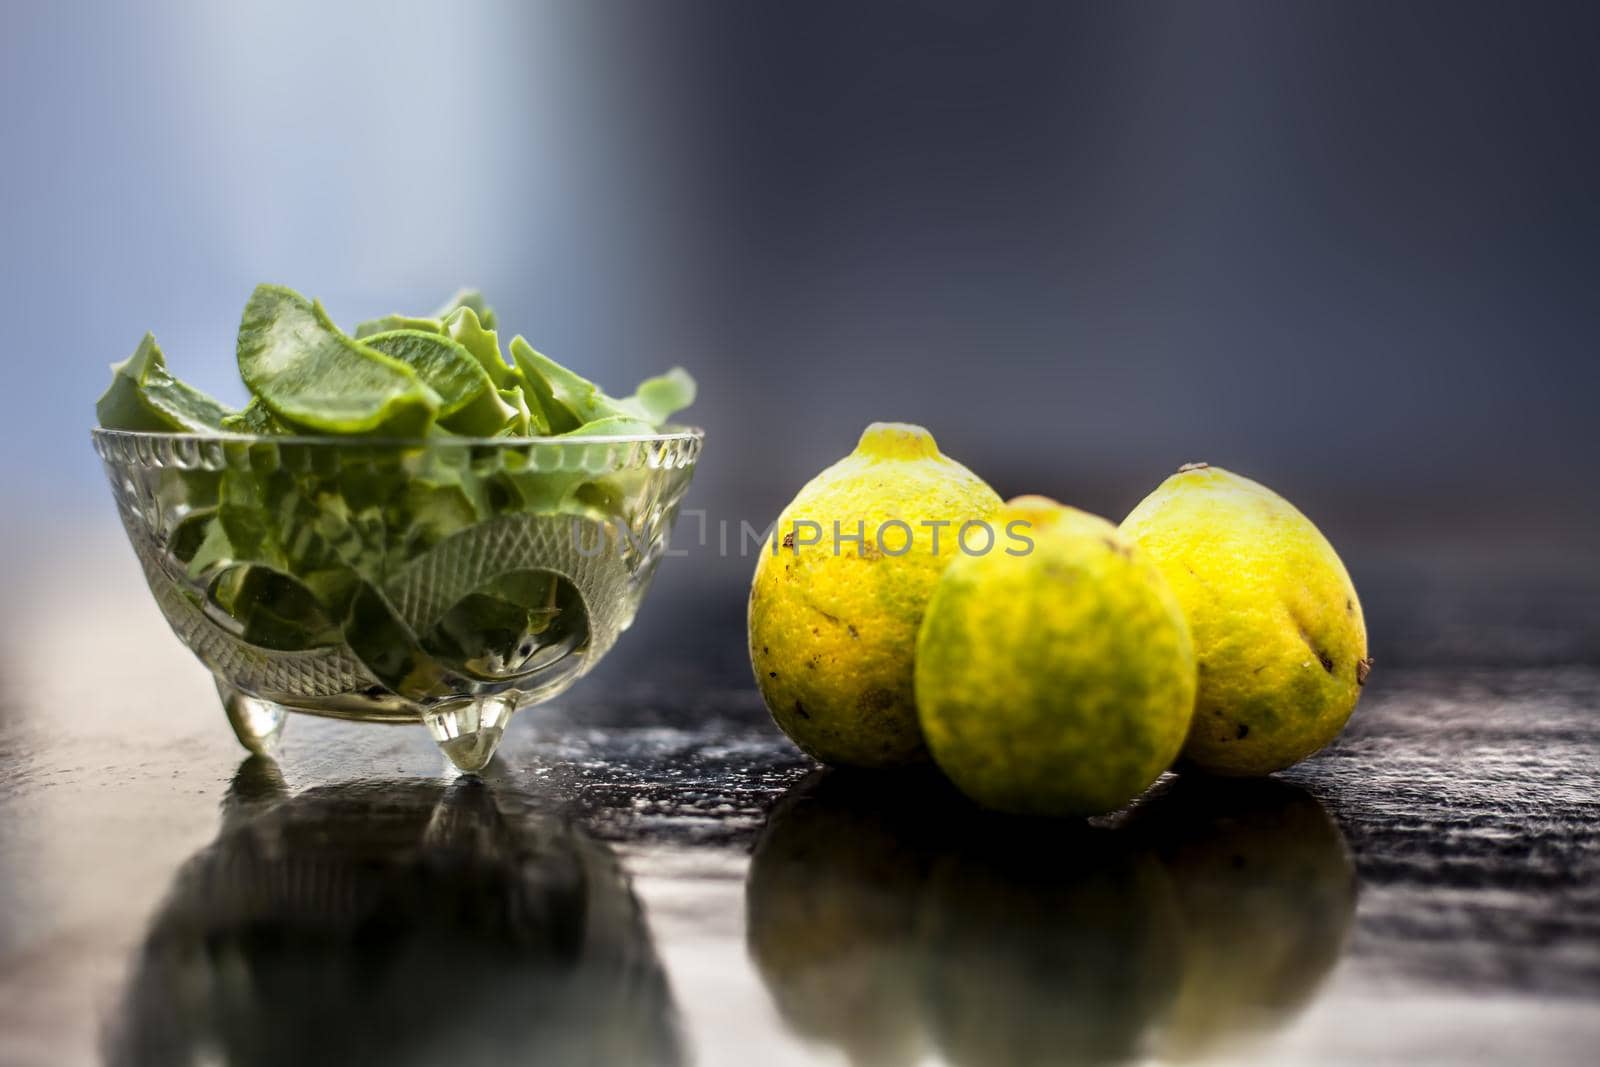 Raw cut aloevera or aloe vera gel in a glass bowl and some fresh ripe lemons or limbu or nimbo on wooden surface along with their reflection on the surface.